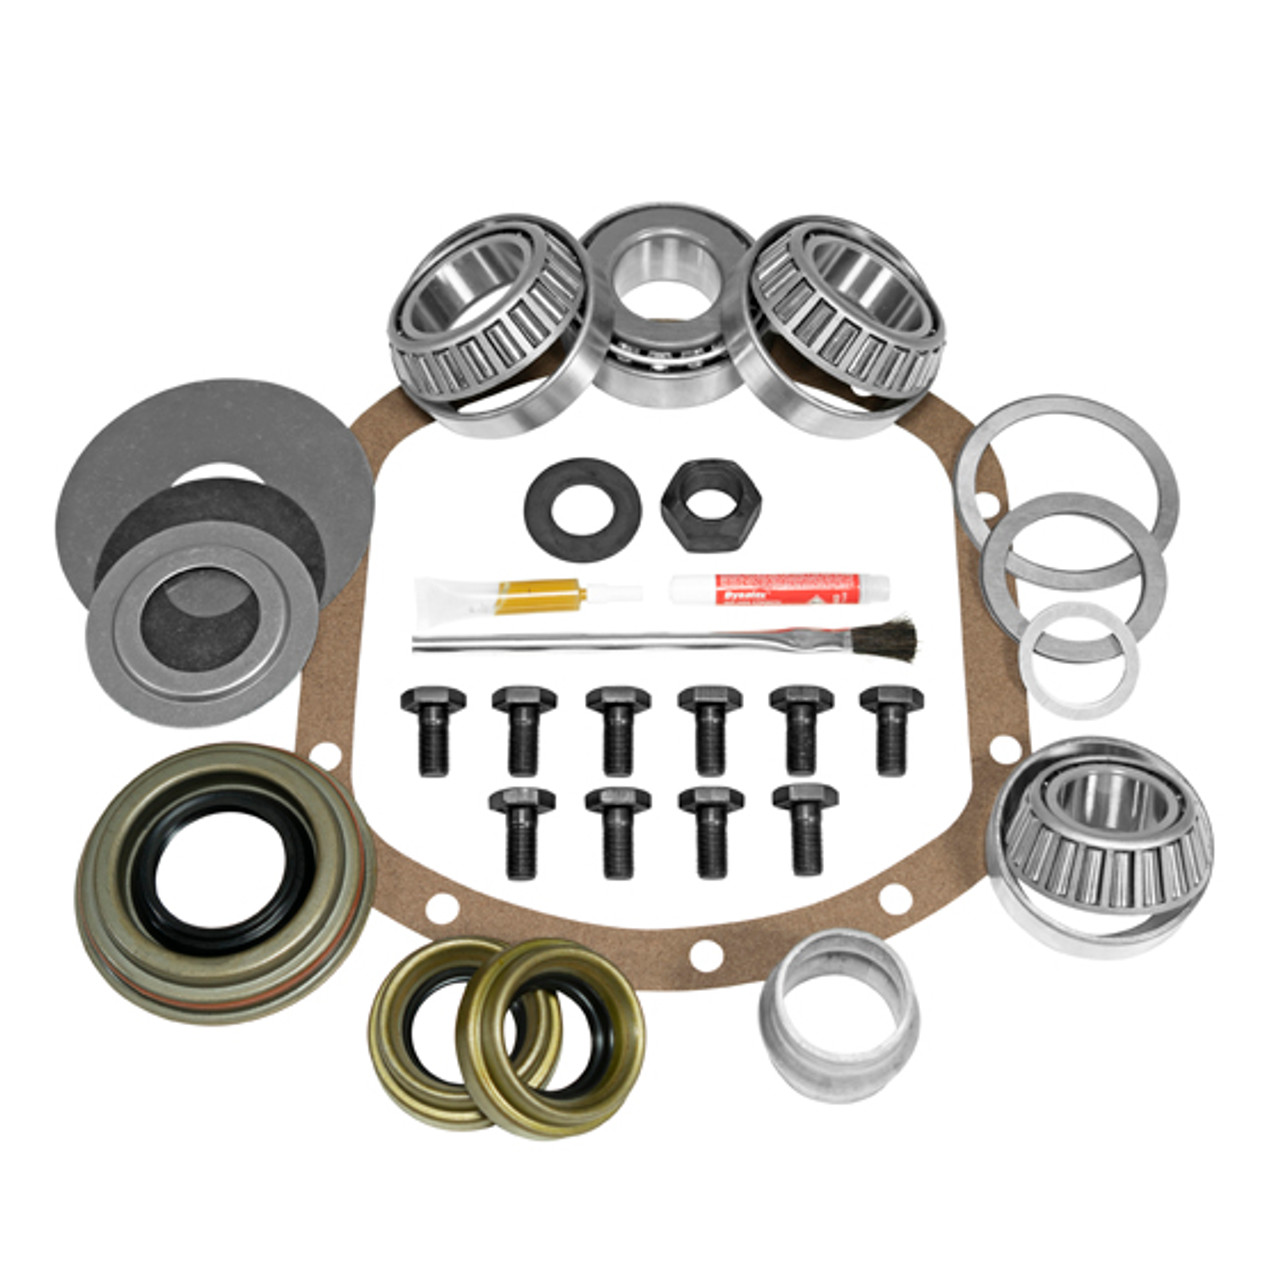 USA Standard Master Overhaul kit for the Dana "super" 30 front differential, Jeep & Chrysler